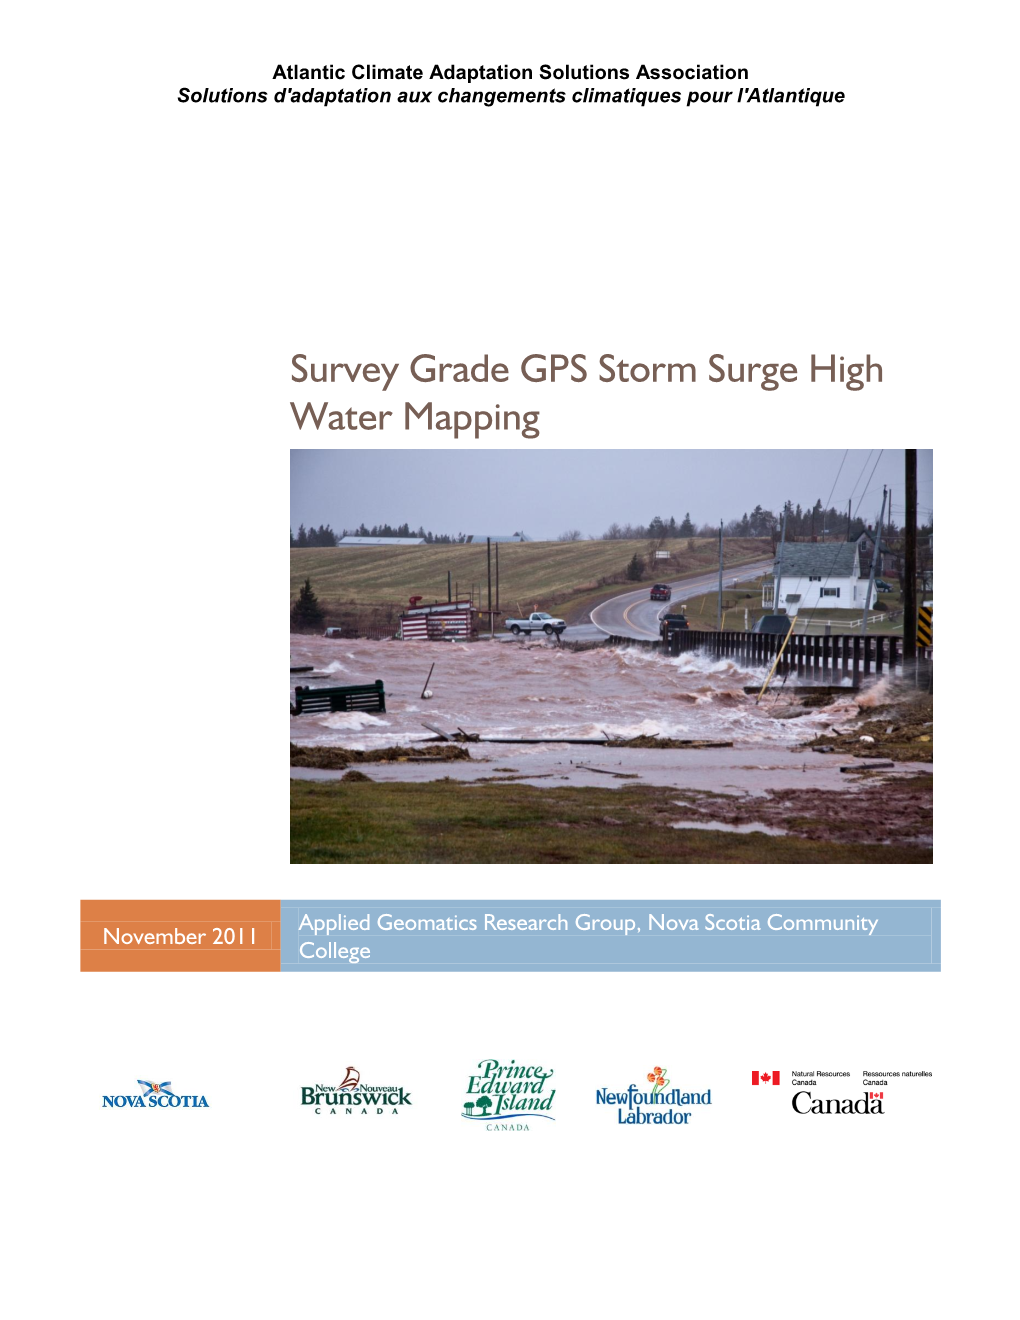 Survey Grade GPS Storm Surge High Water Mapping